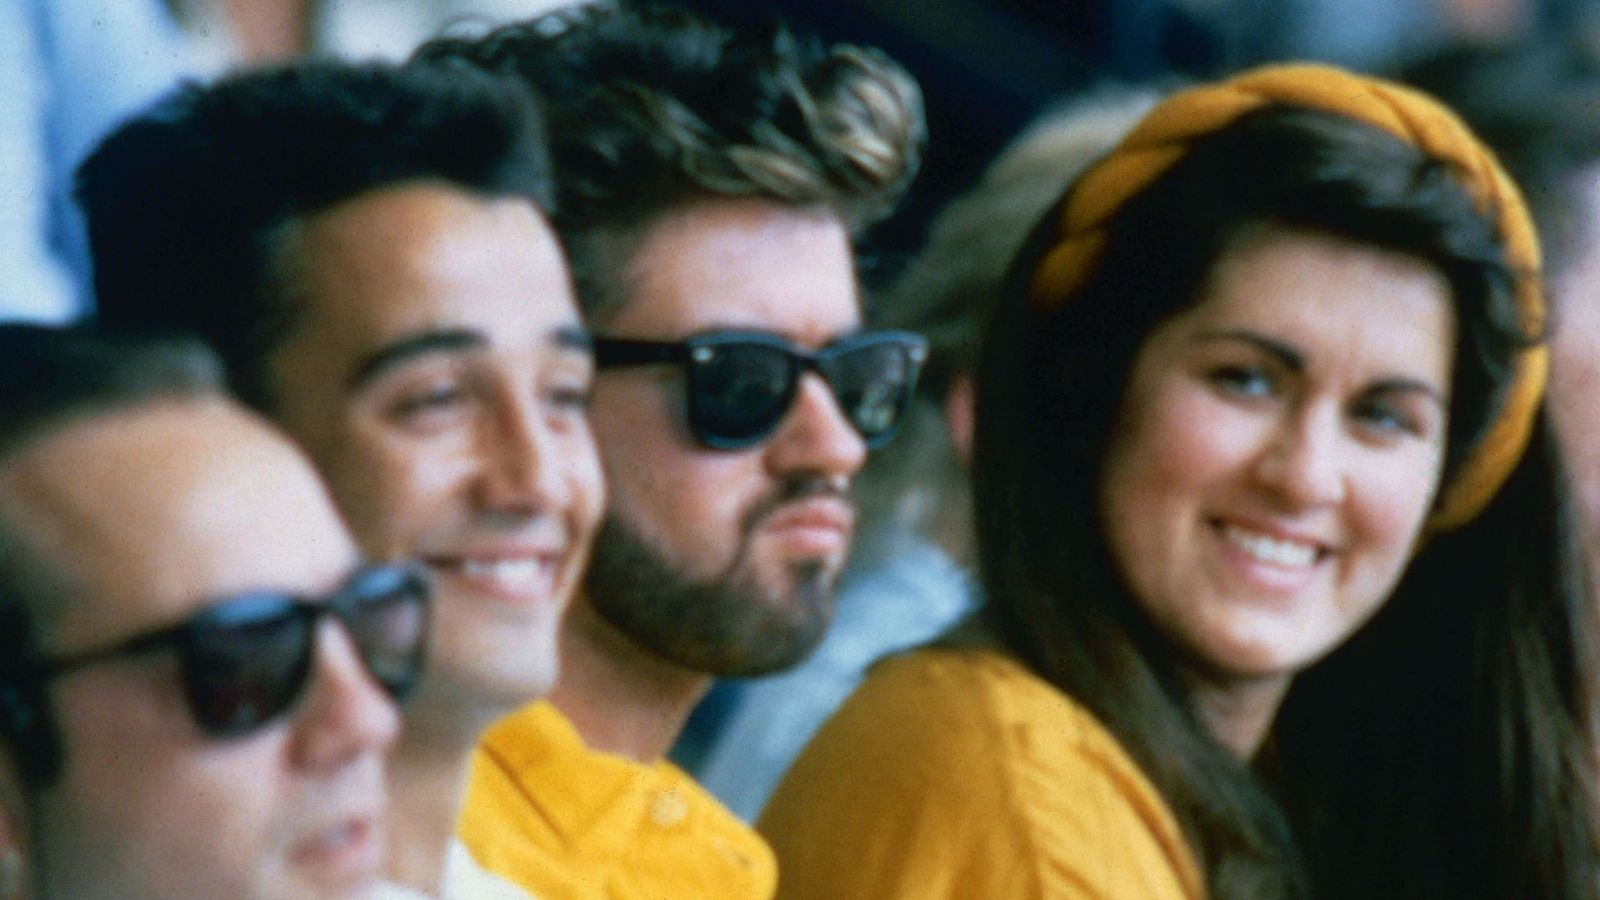 George Michael with Andrew Ridgeley and sister Melanie Panayiotou at Live Aid in 1985